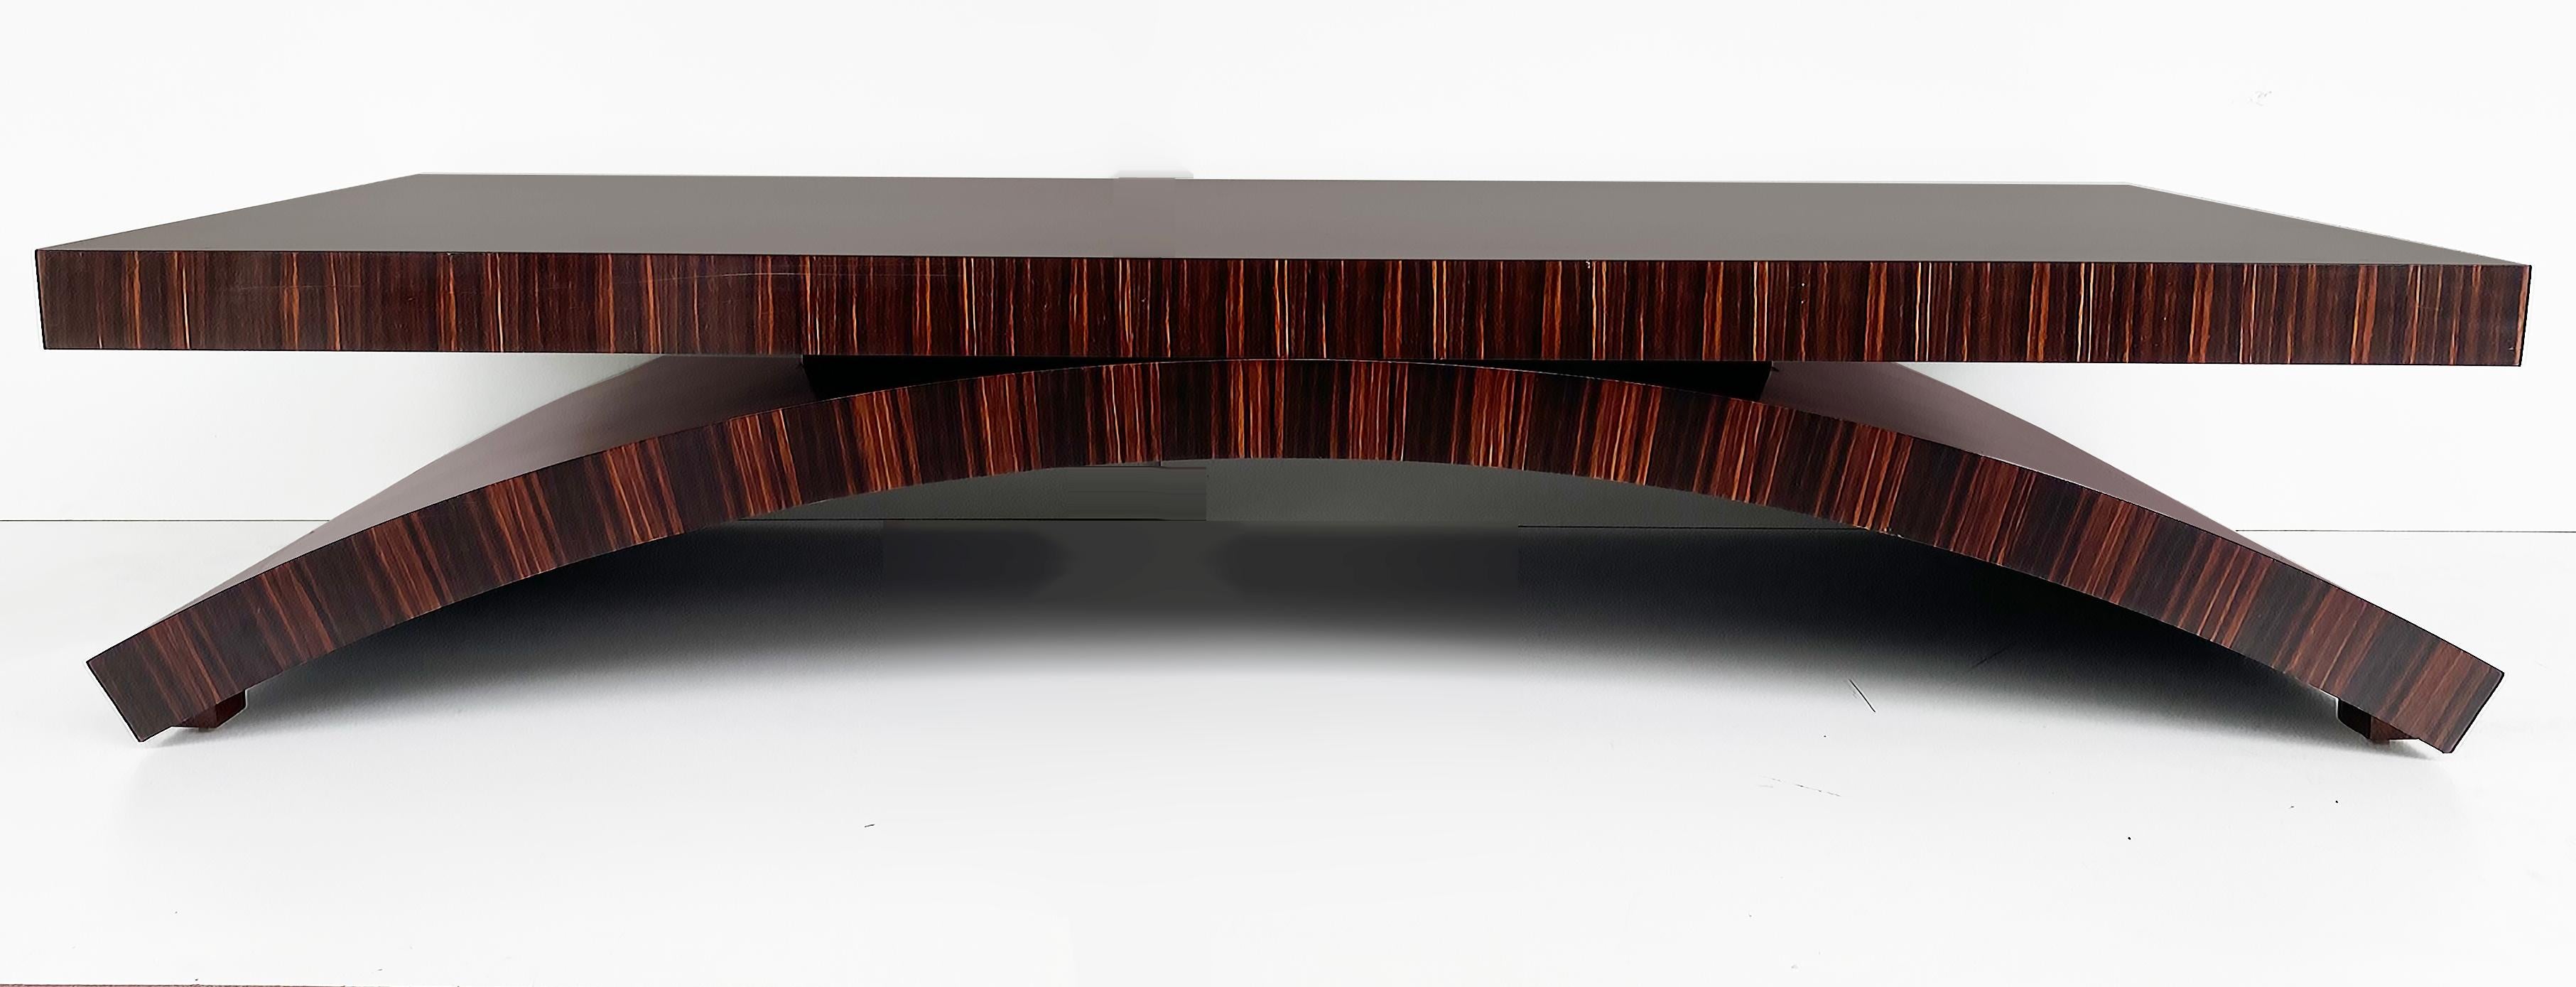 Michael Vanderbyl Boiler Macassar Ebony Arch Coffee Table, Large Size  In Good Condition For Sale In Miami, FL